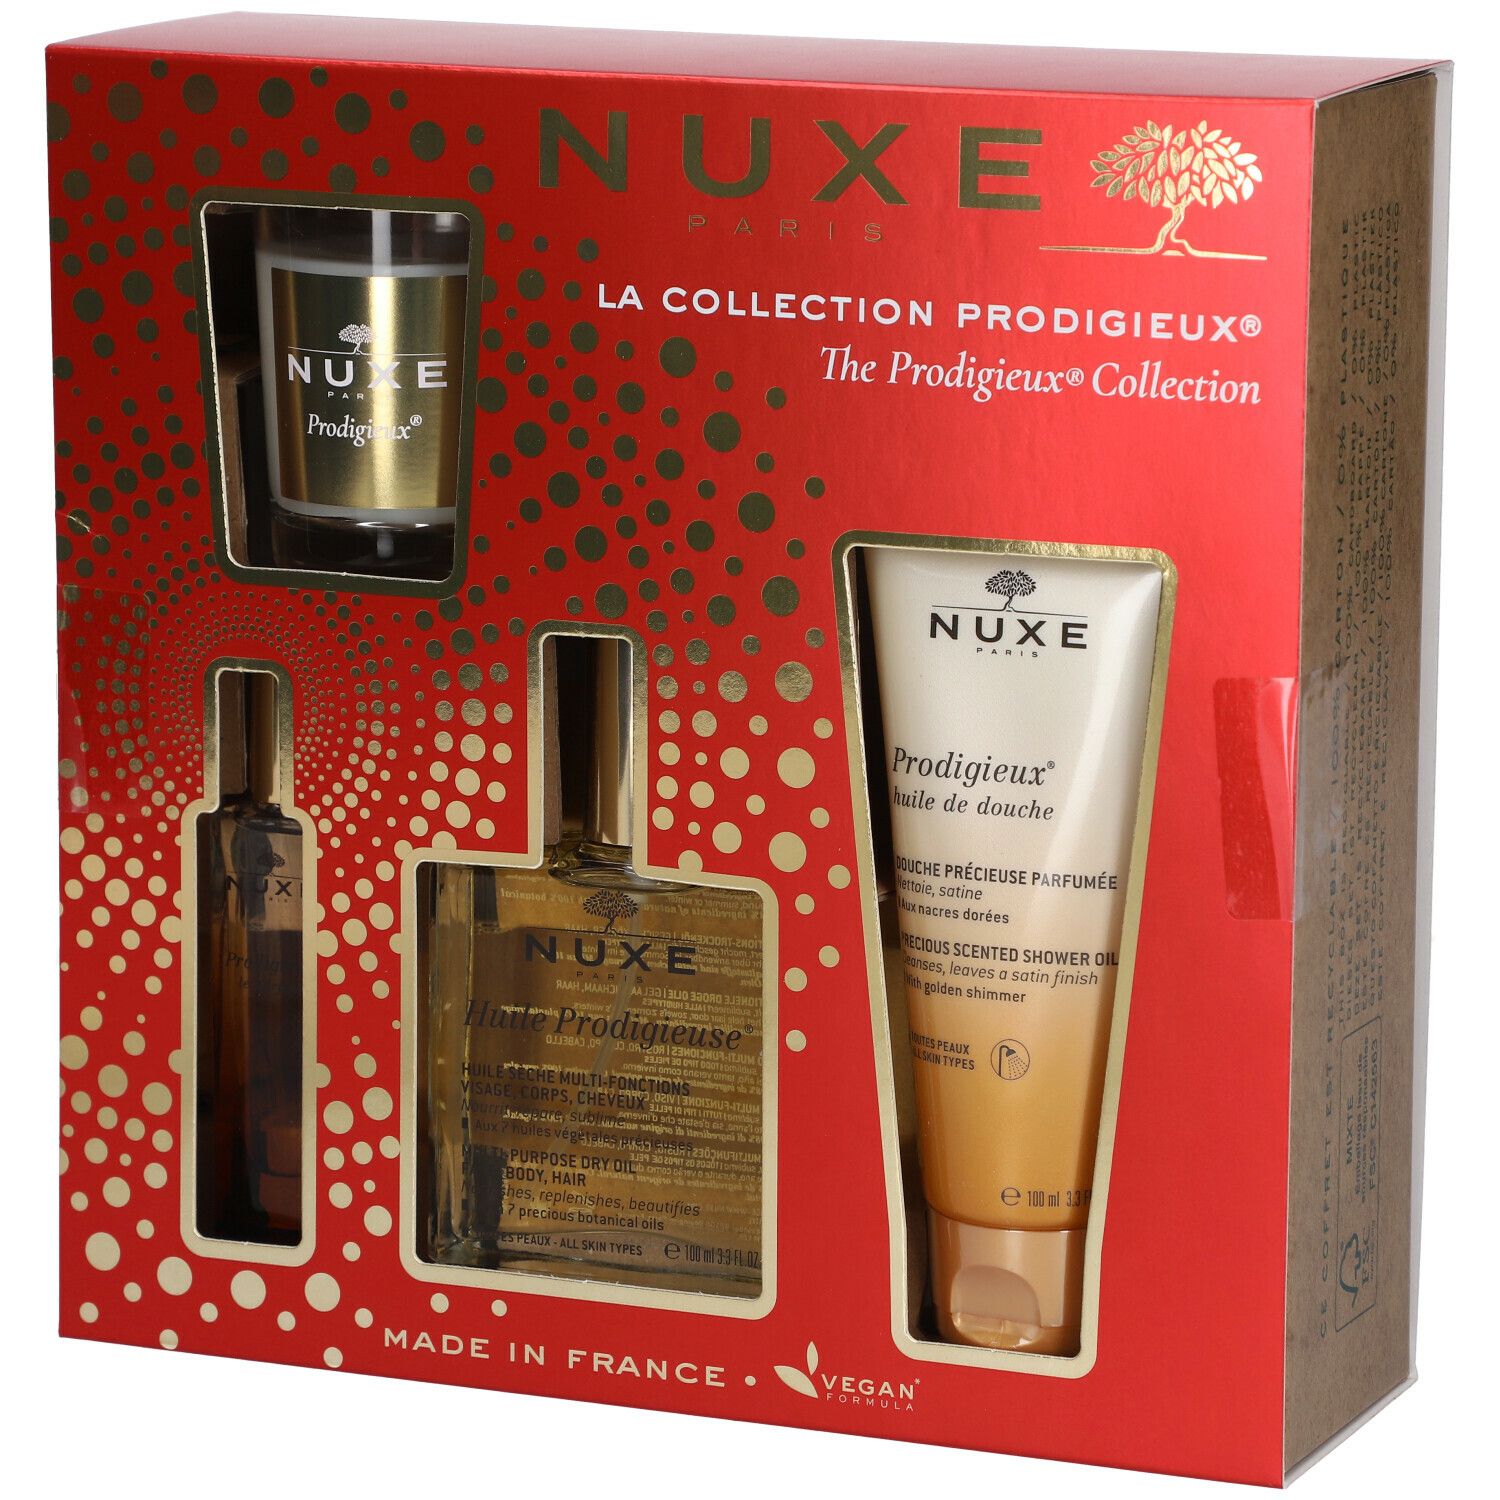 Nuxe The Prodigieux® Collection